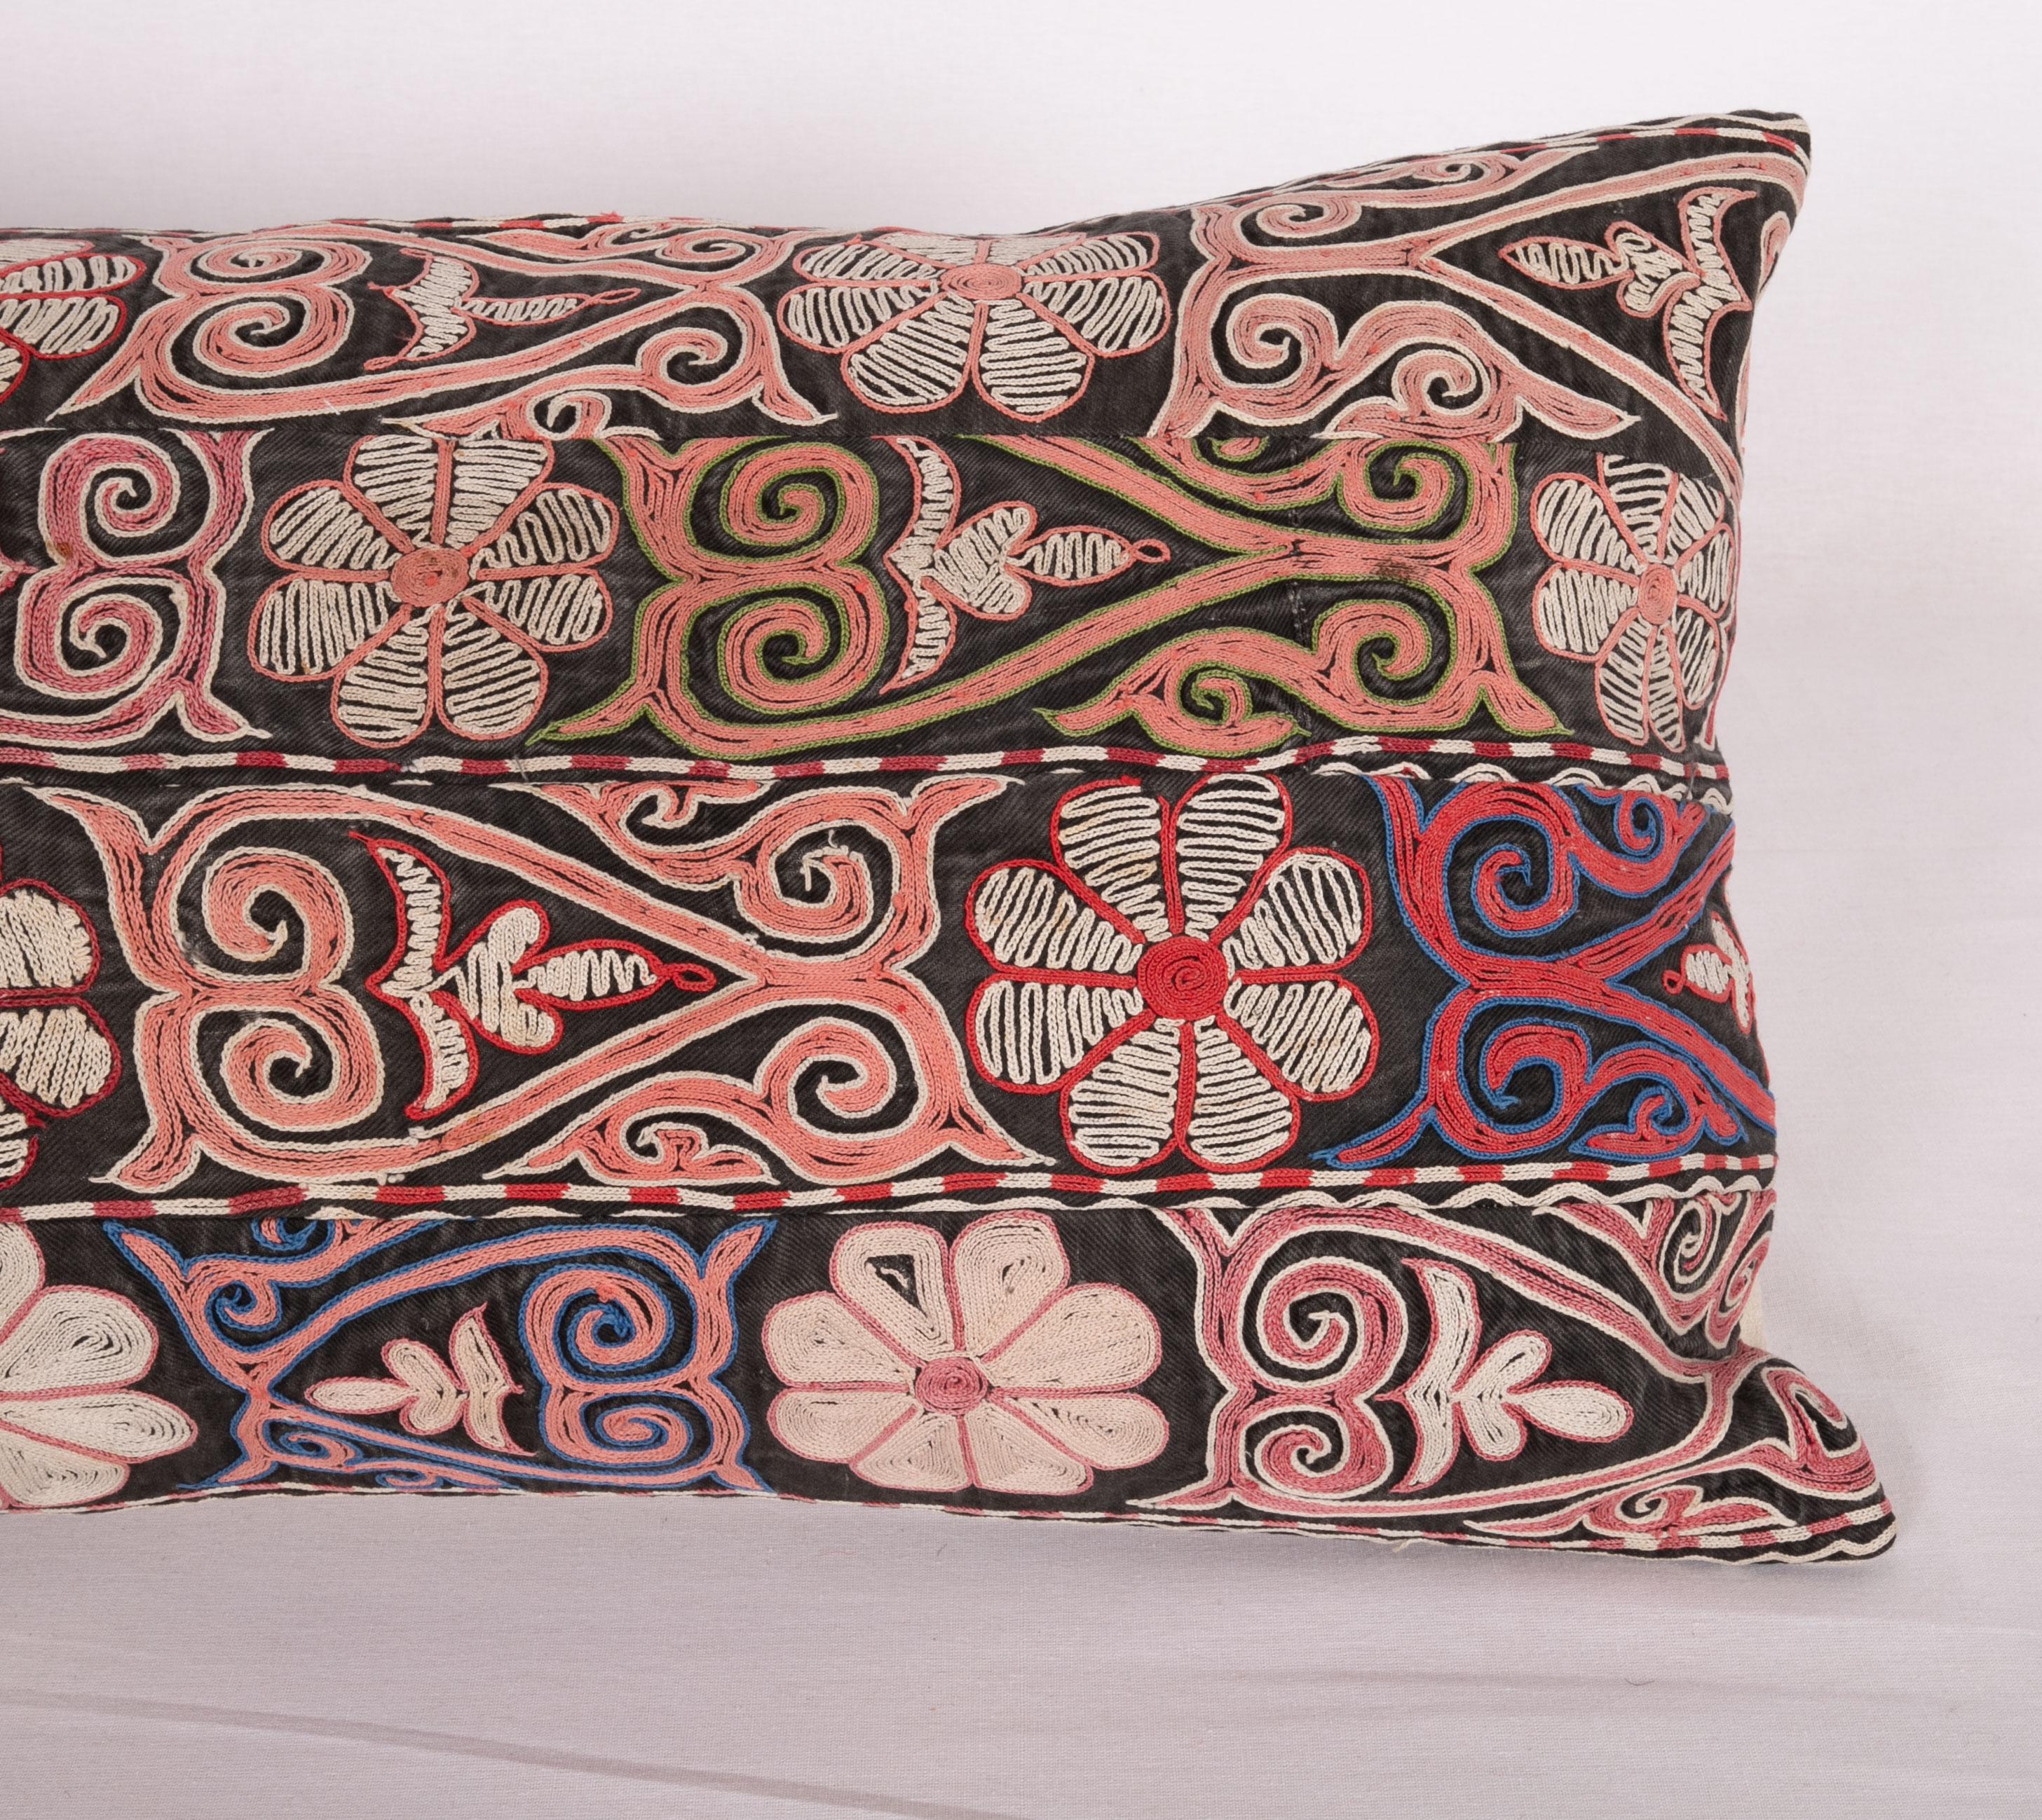 Kazakhstani Pillow Case Made from the Borders of a Kyrgyz / Kazak Embroidery